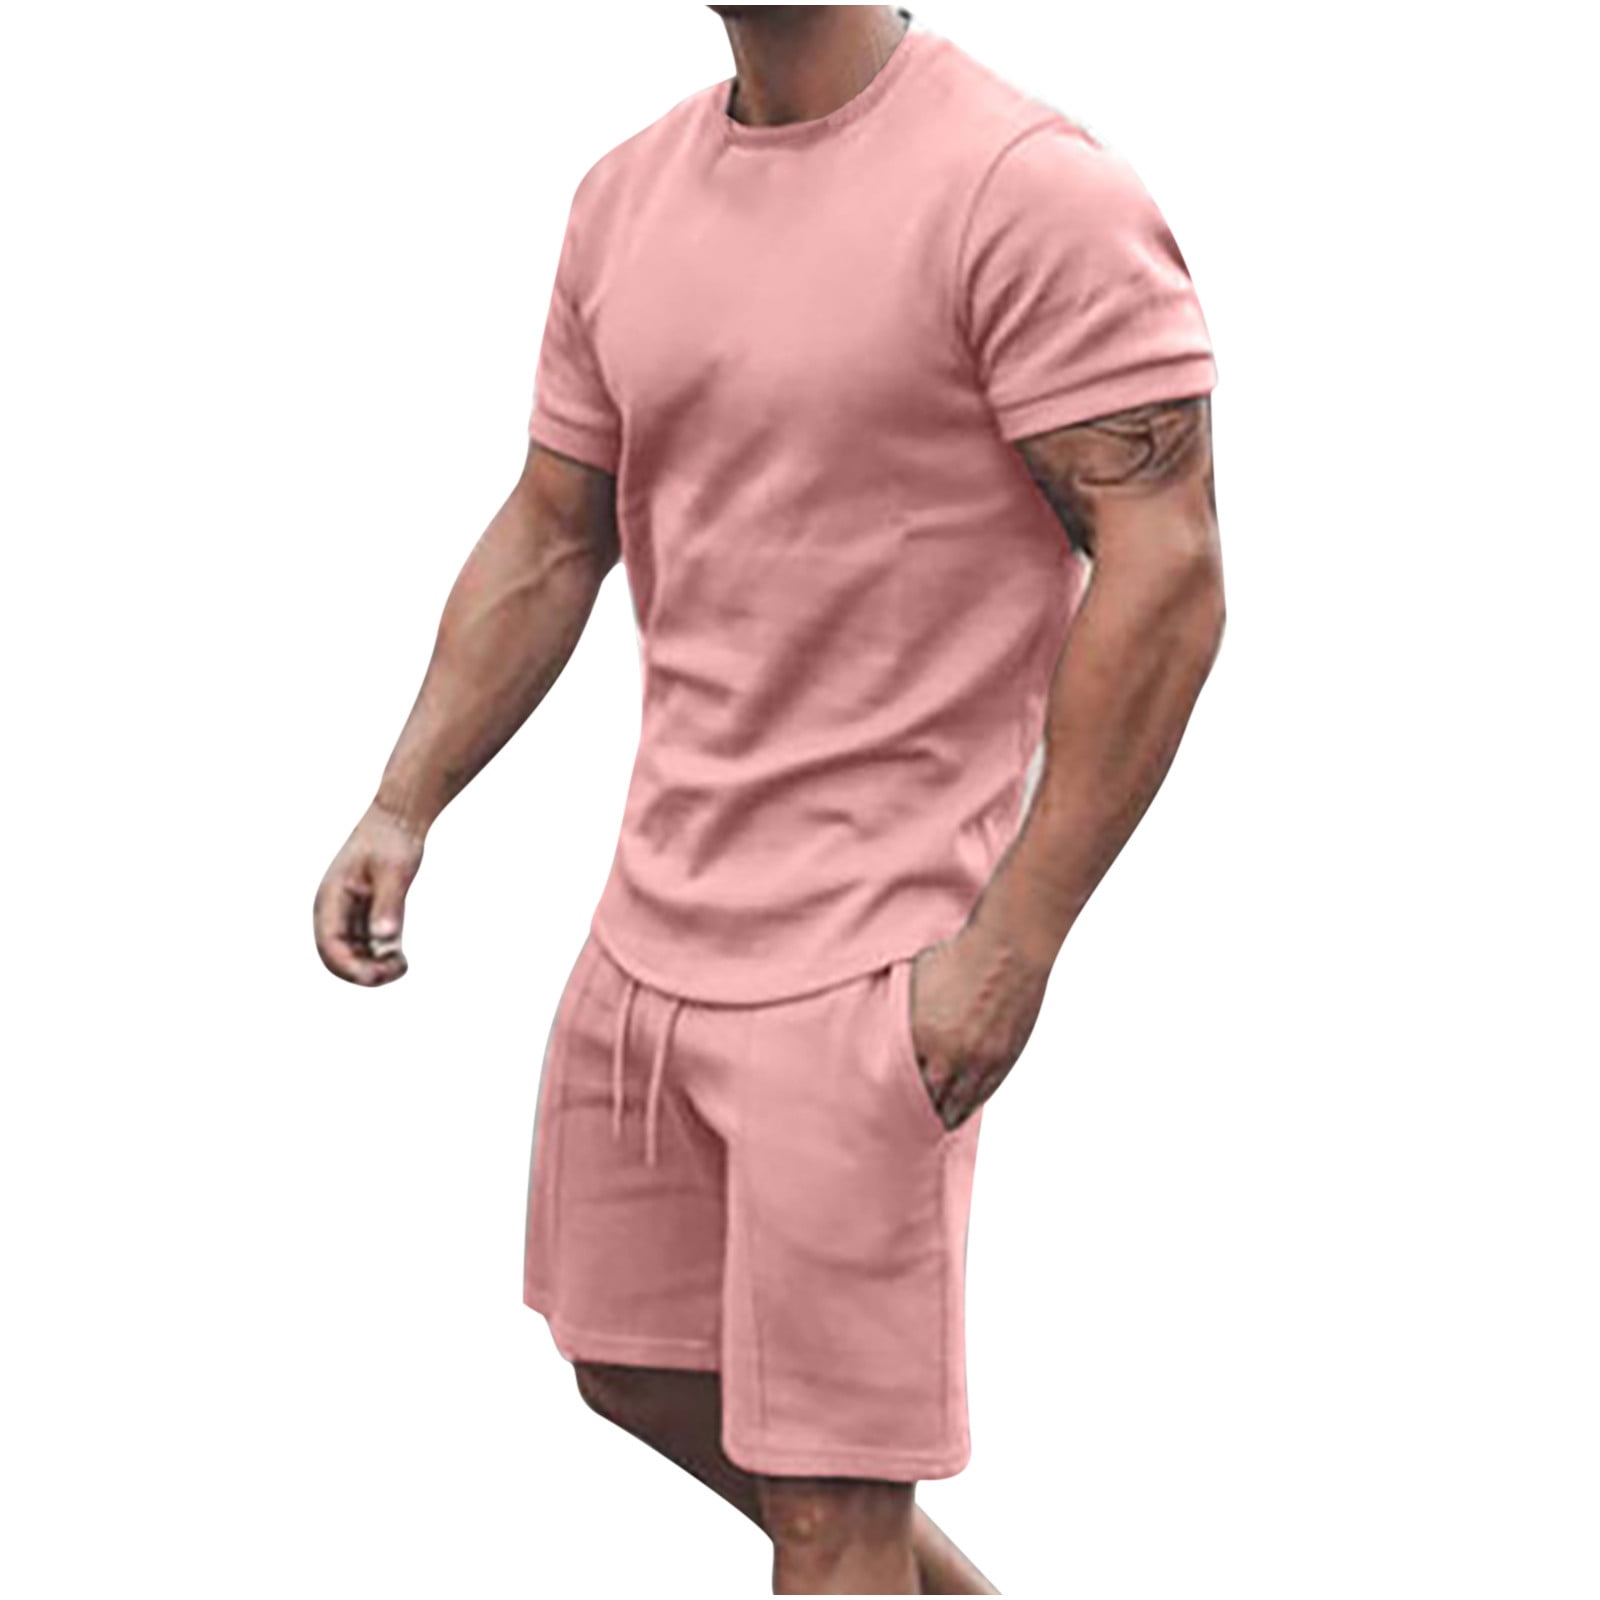 Lopecy-Sta Men 2 Piece Casual Sleeve Tee Shirts and Fit Sport Shorts Set Mens Outfits Mens Shirts Casual Clearance - Walmart.com